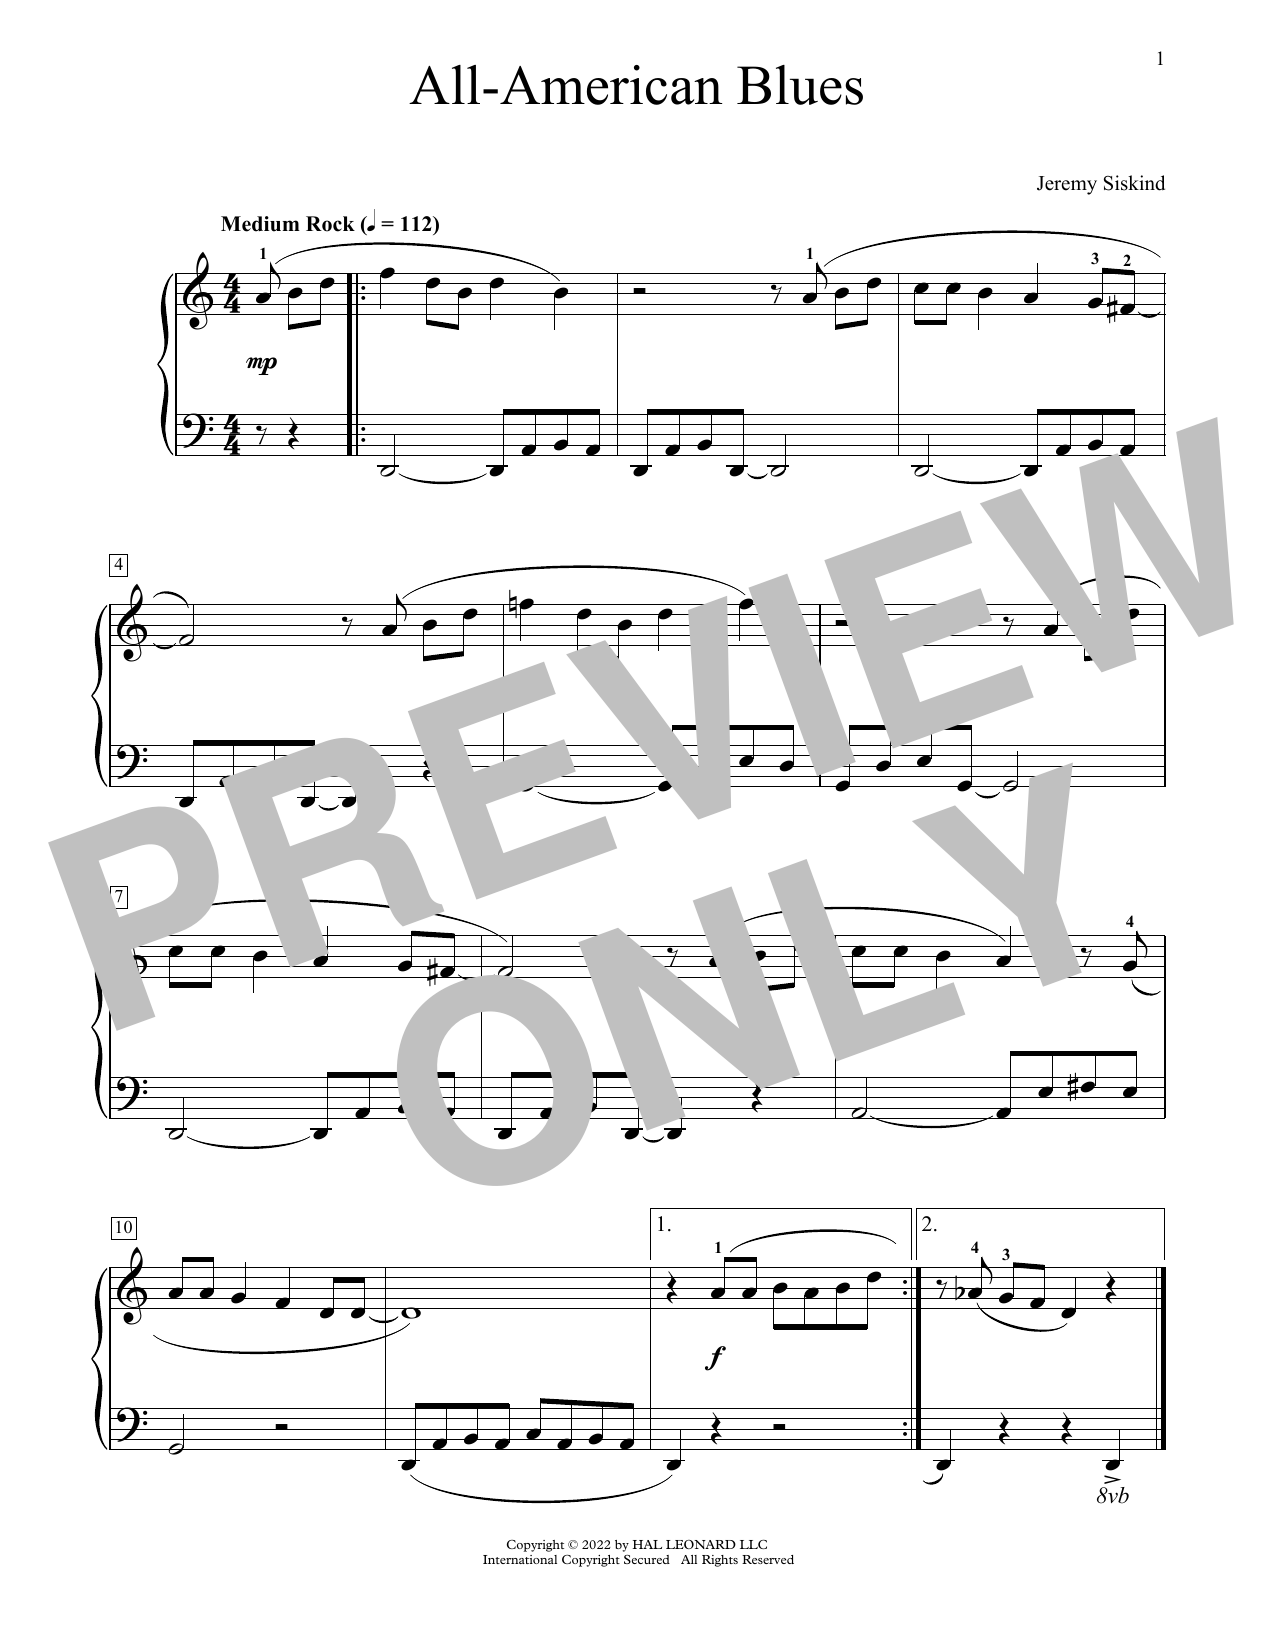 Download Jeremy Siskind All-American Blues Sheet Music